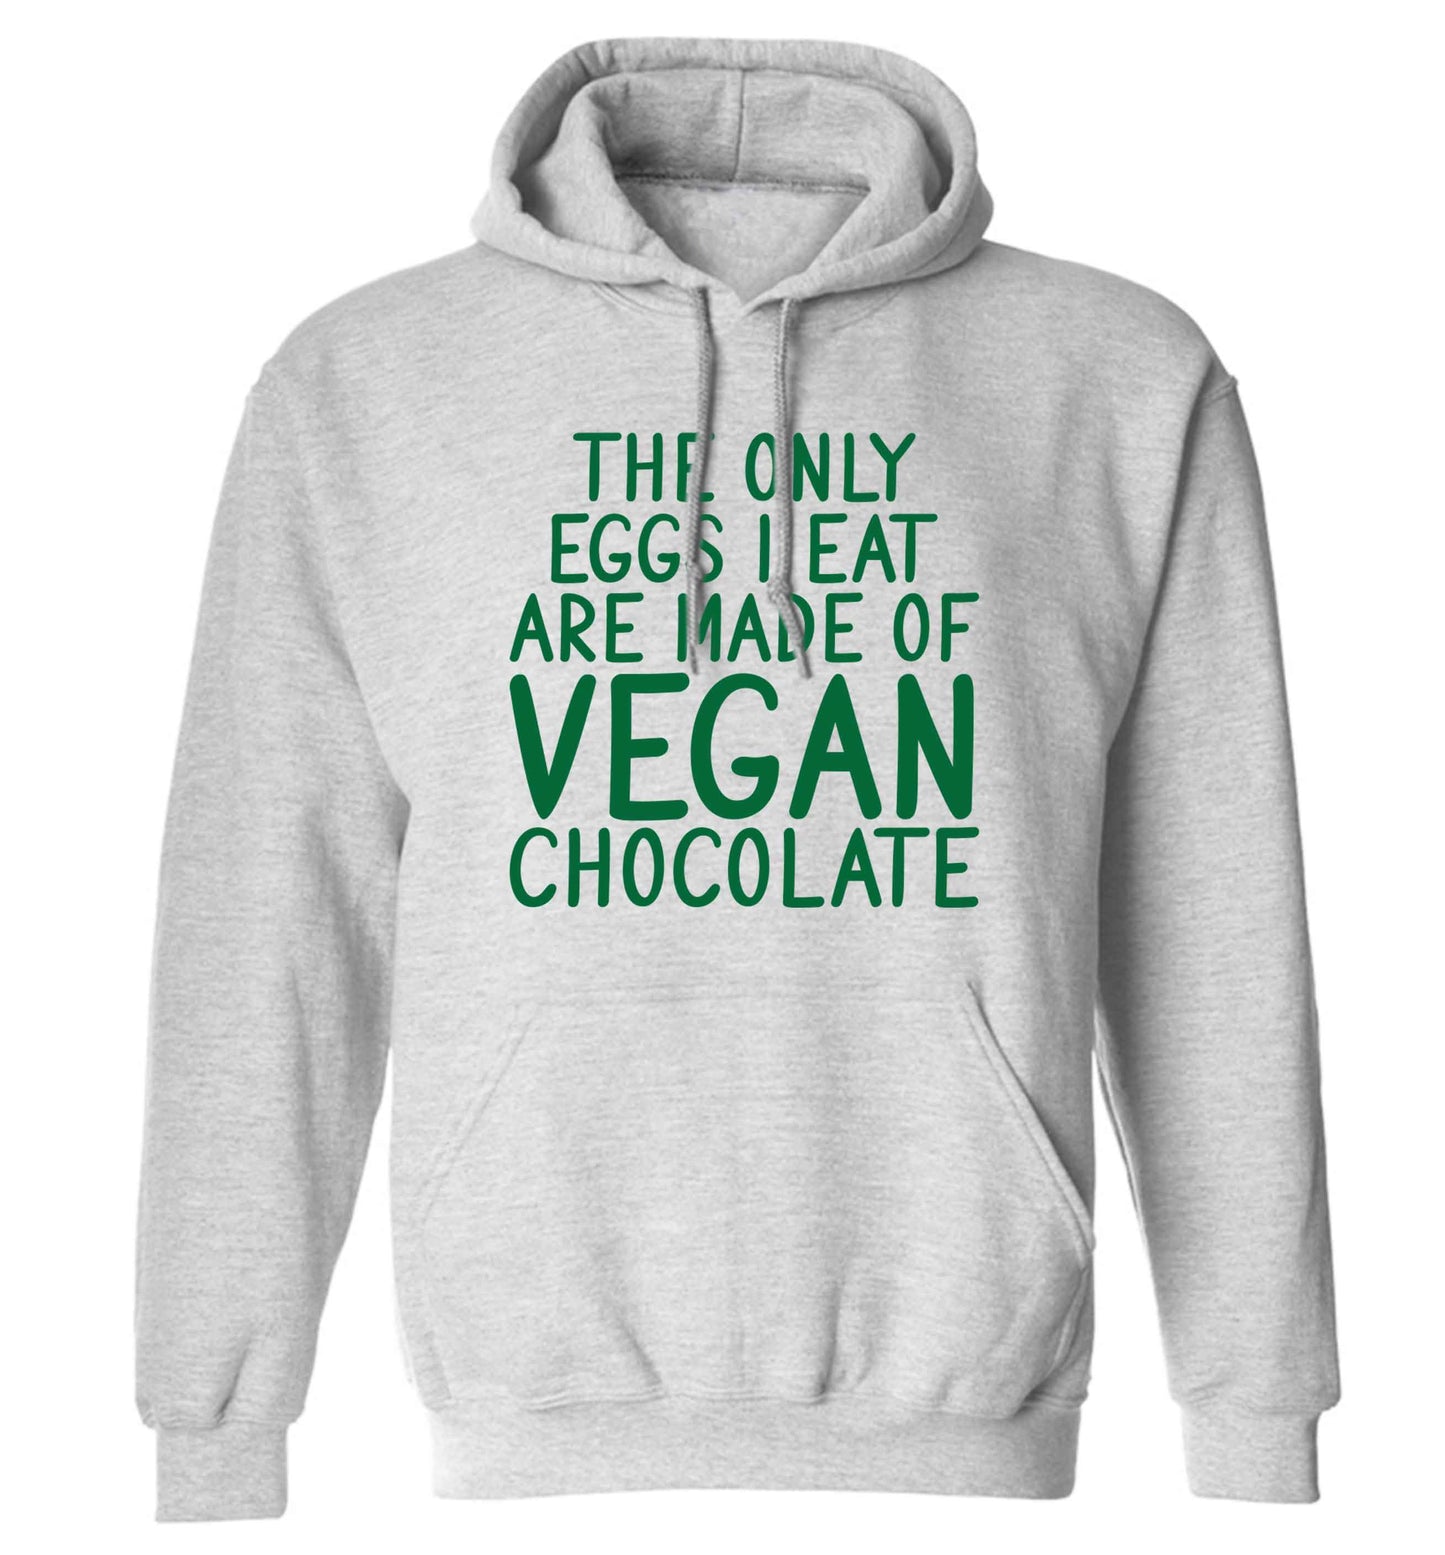 The only eggs I eat are made of vegan chocolate adults unisex grey hoodie 2XL